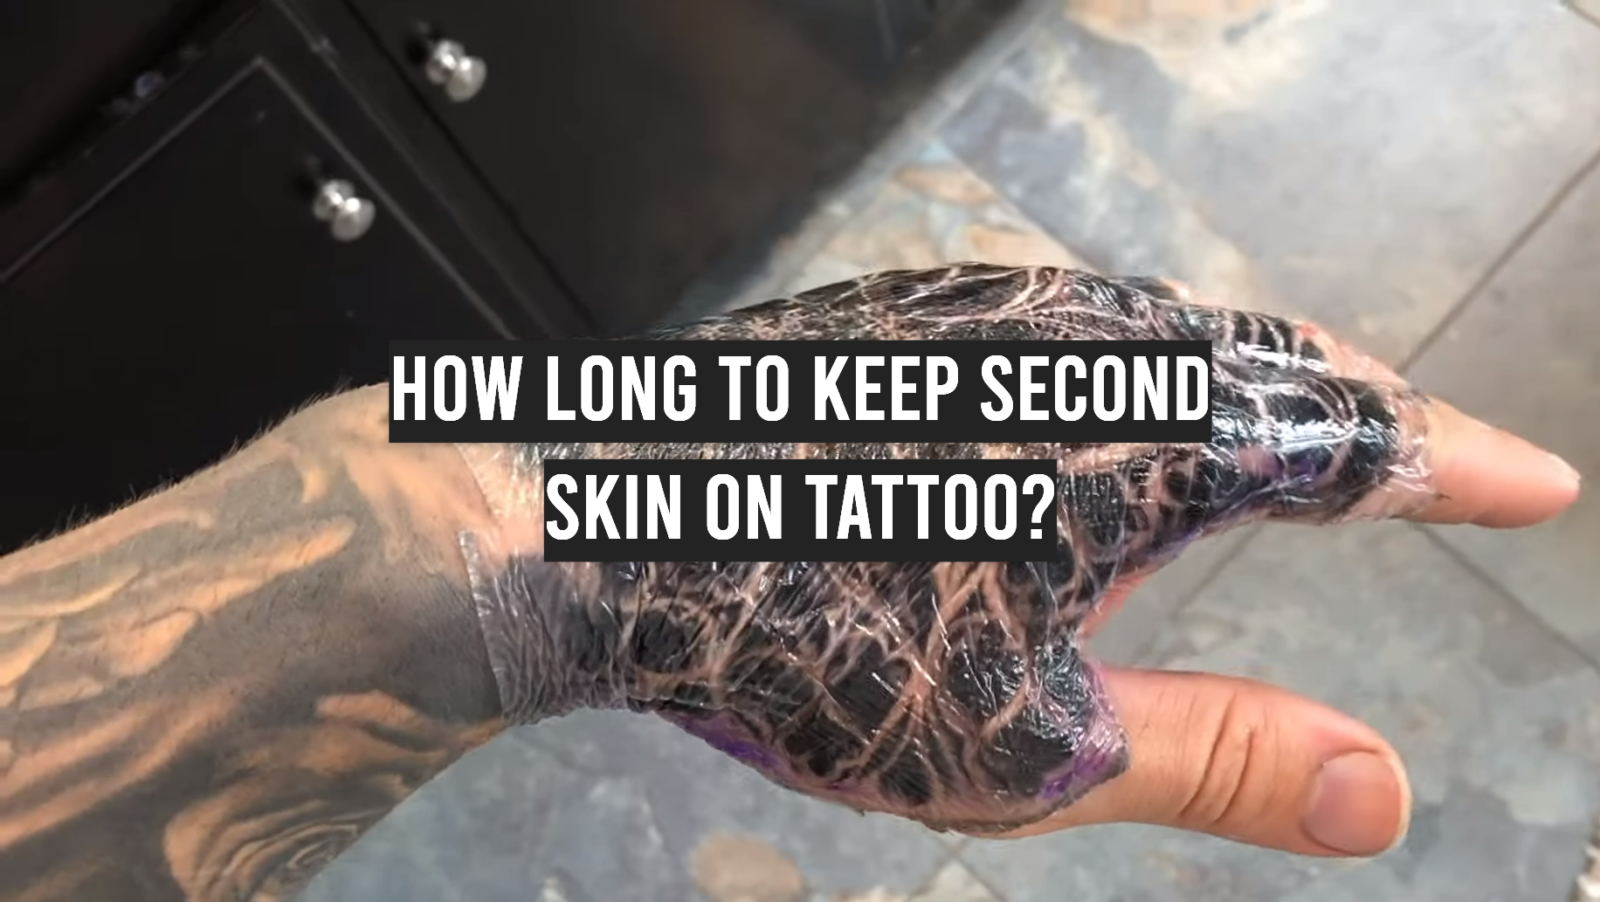 How Long to Keep Second Skin on Tattoo?